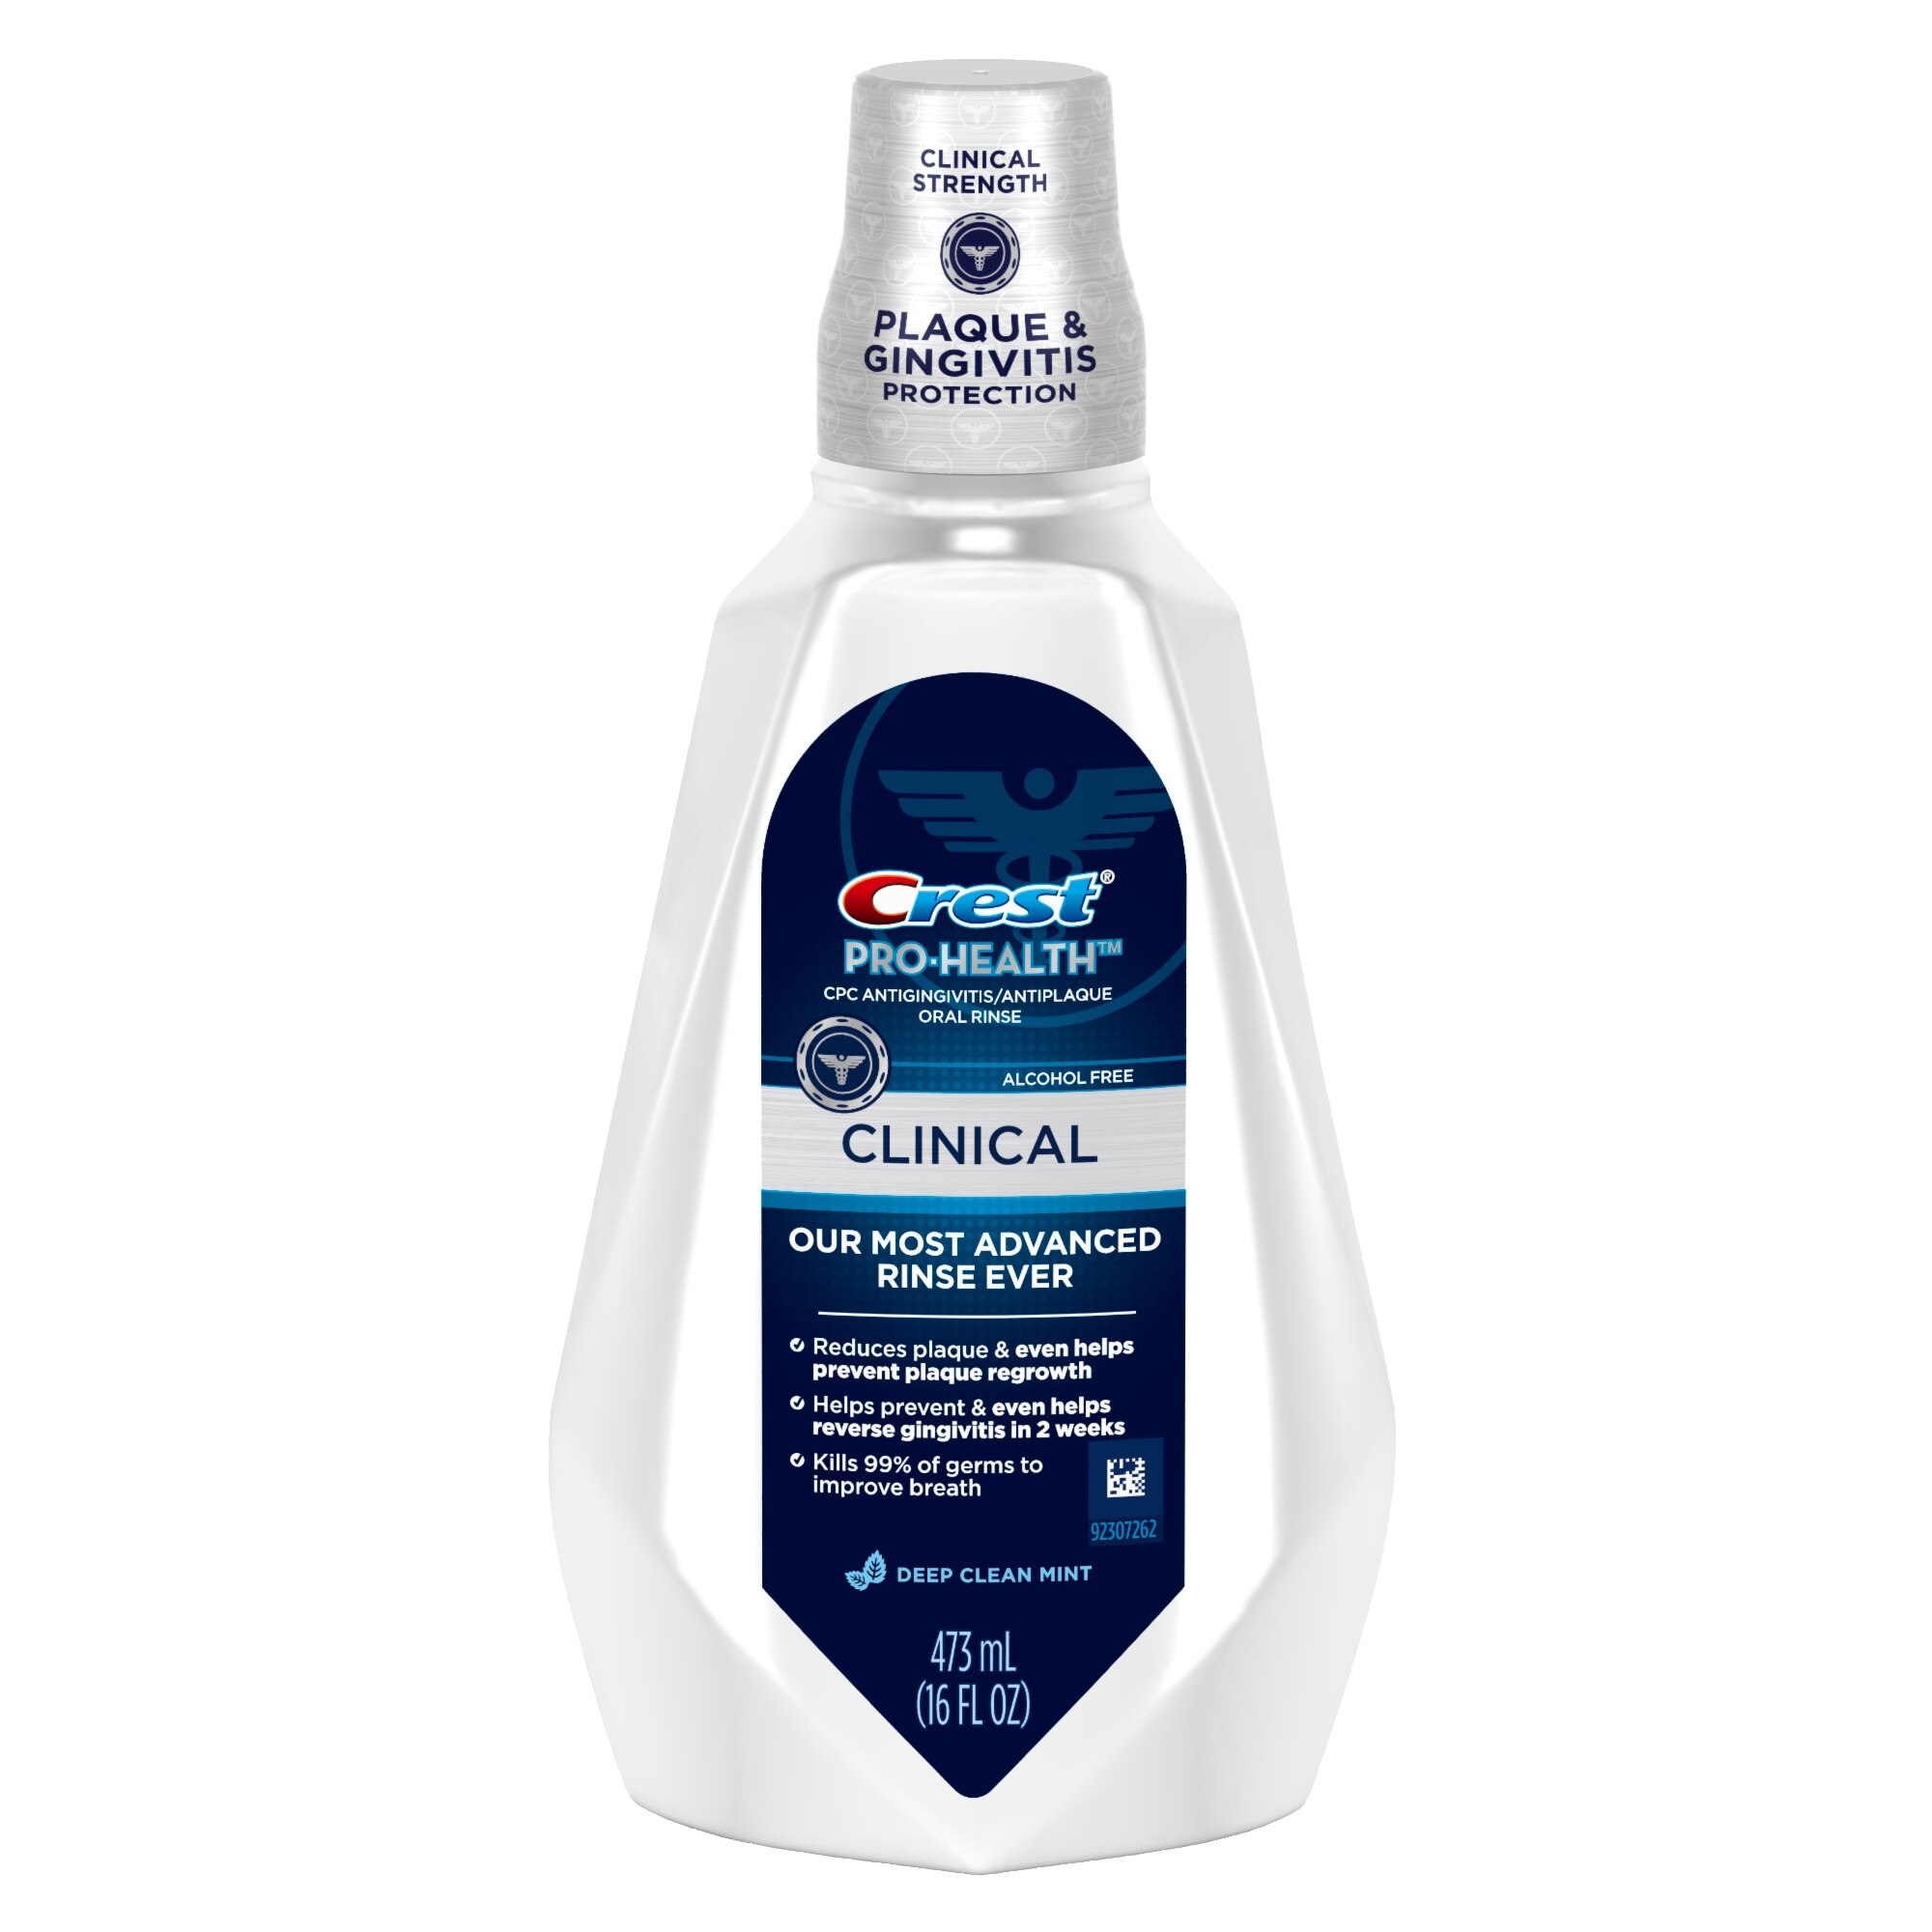 Crest Pro-Health Clinical Mouthwash, Gingivitis Protection, Alcohol Free, Deep Clean Mint, 32 OZ